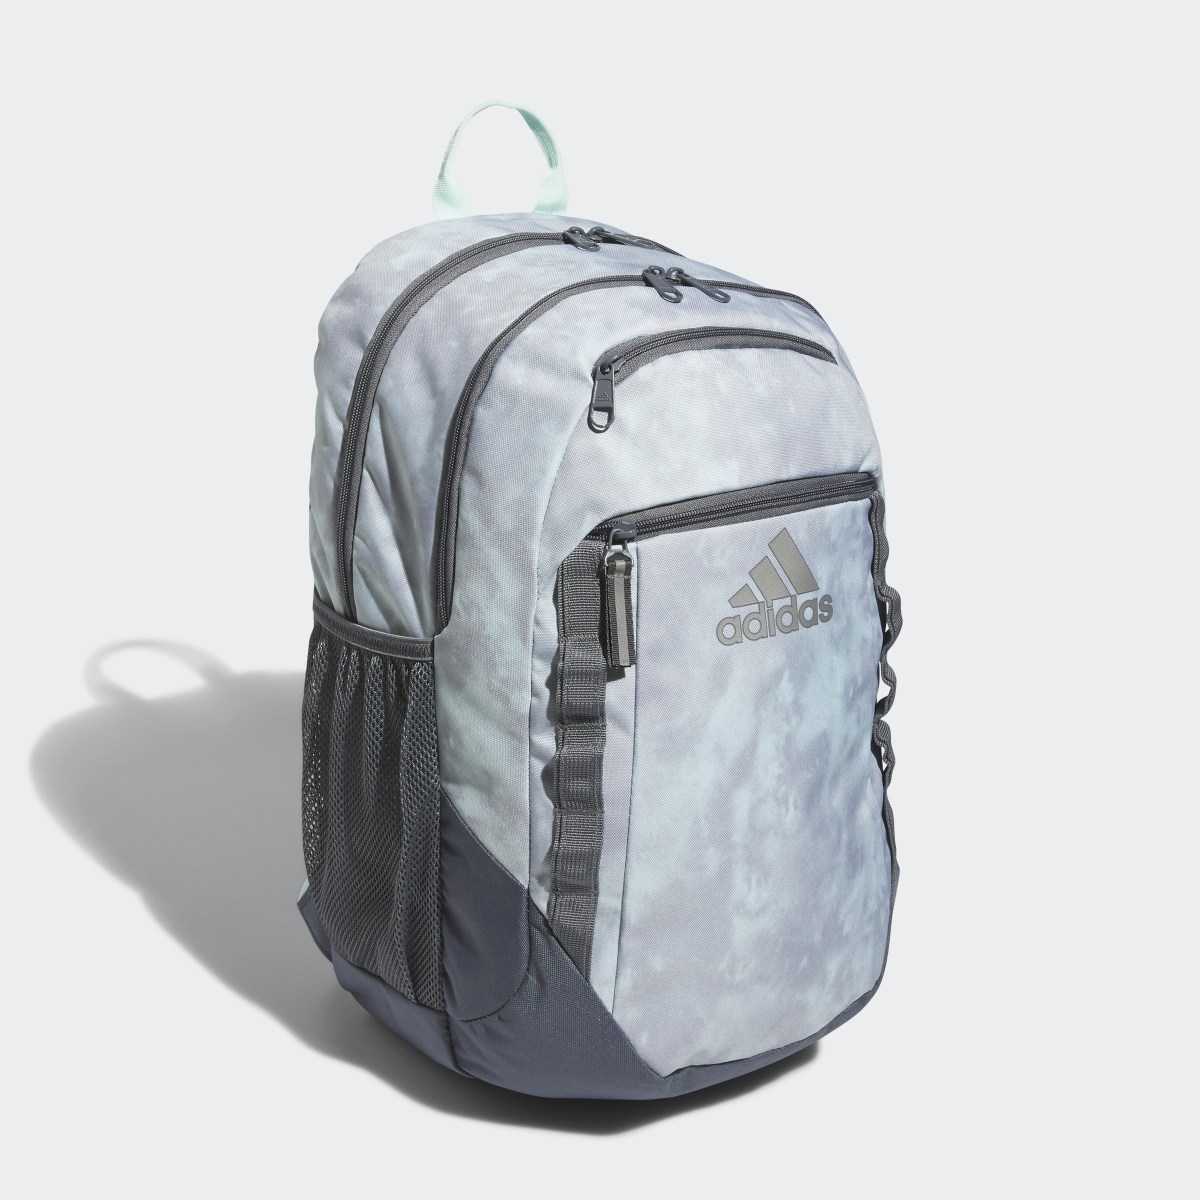 Adidas Excel Backpack. 4